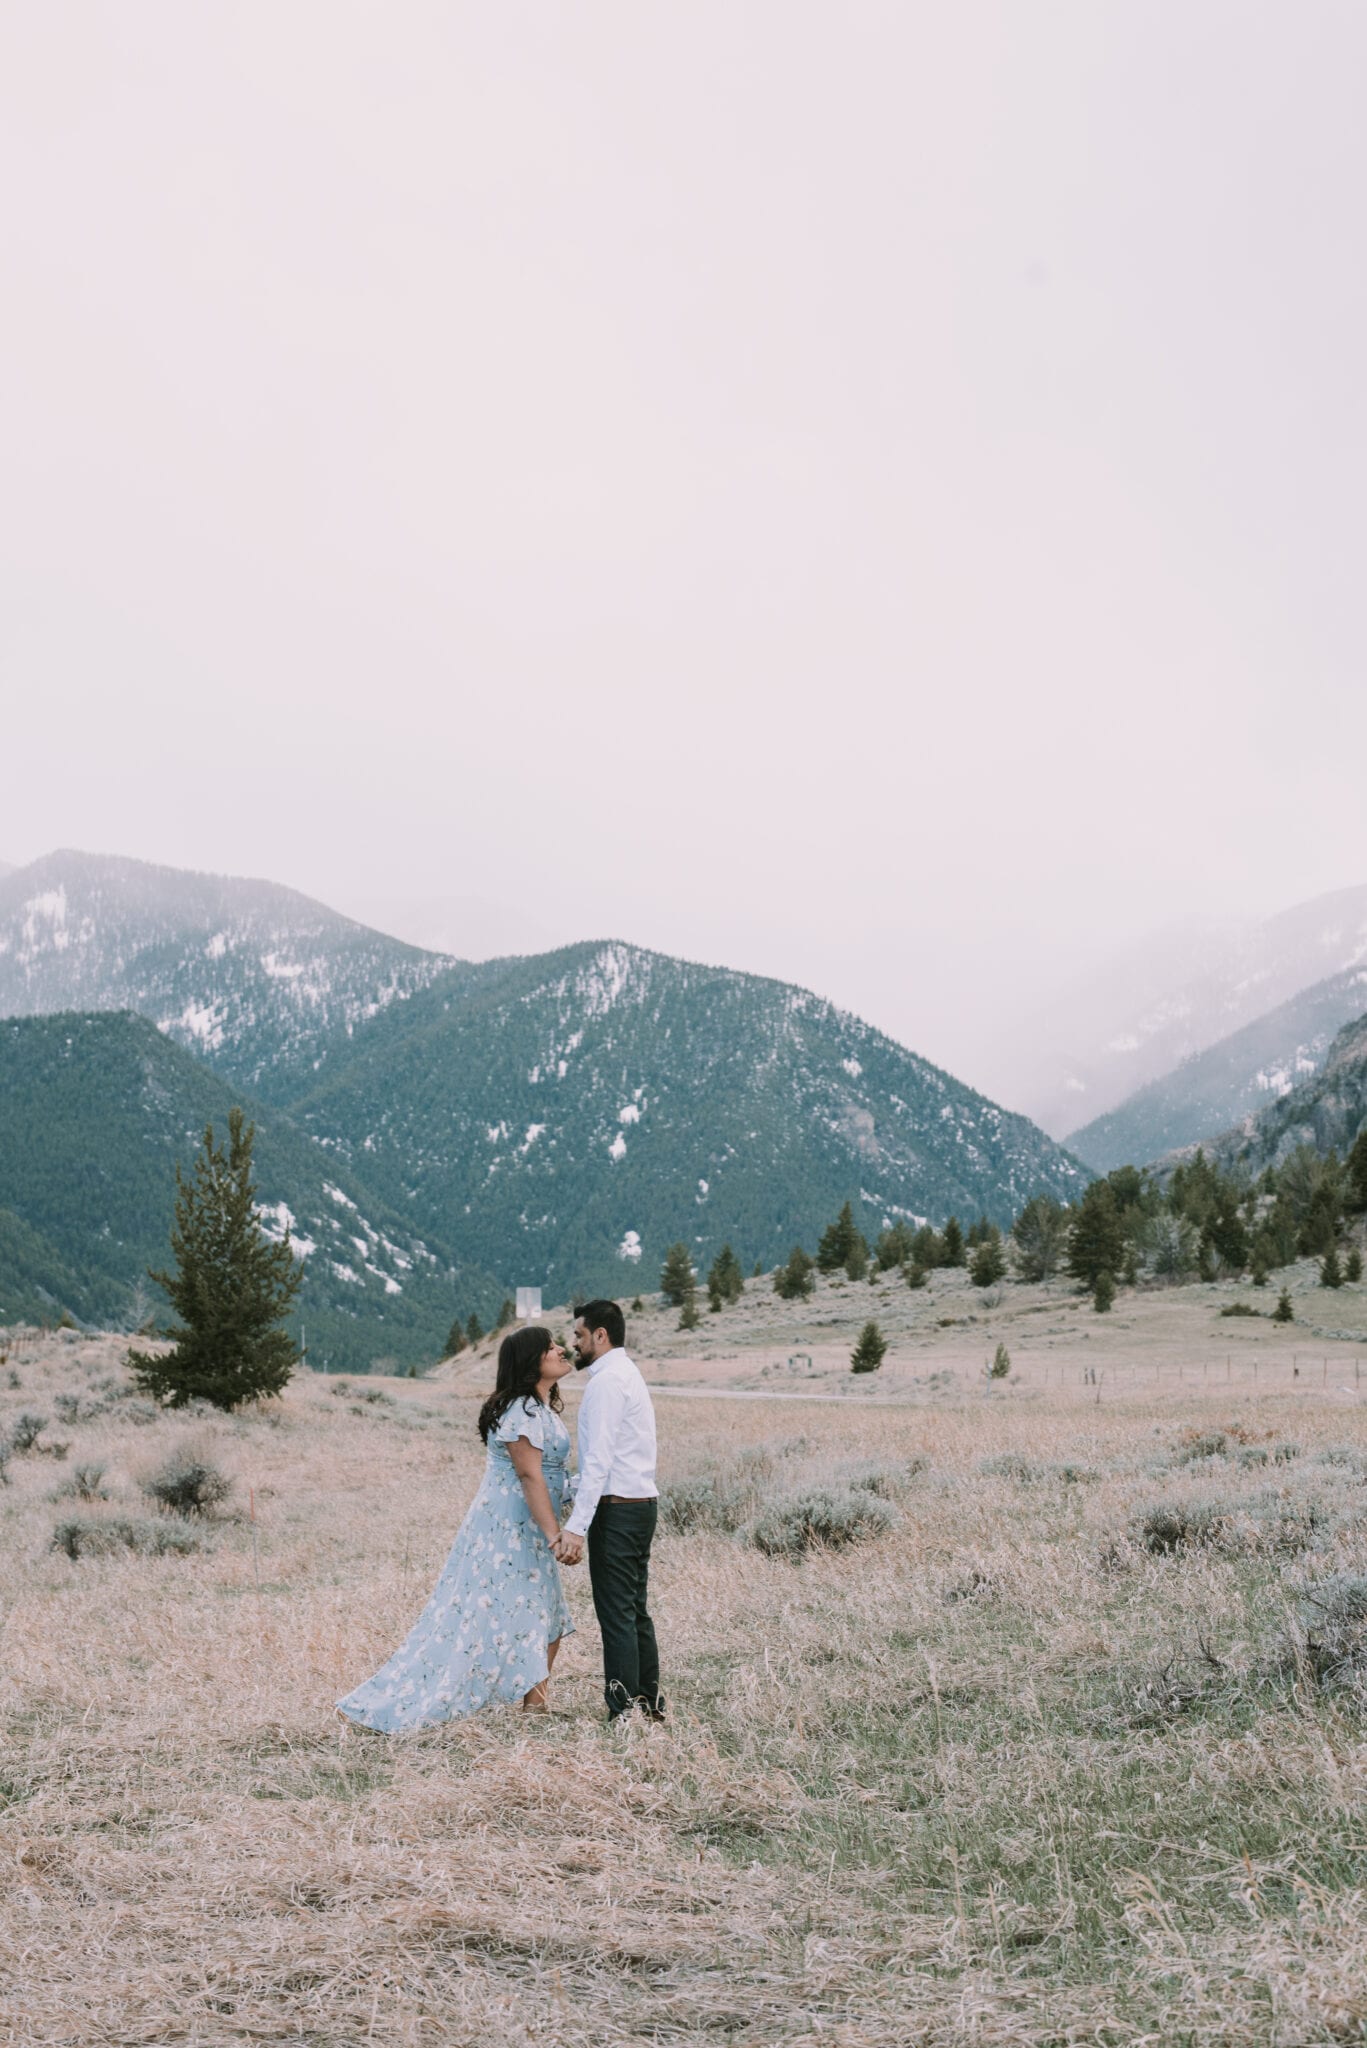 af 119 - Andrea + Felix - Engaged in the Mountains